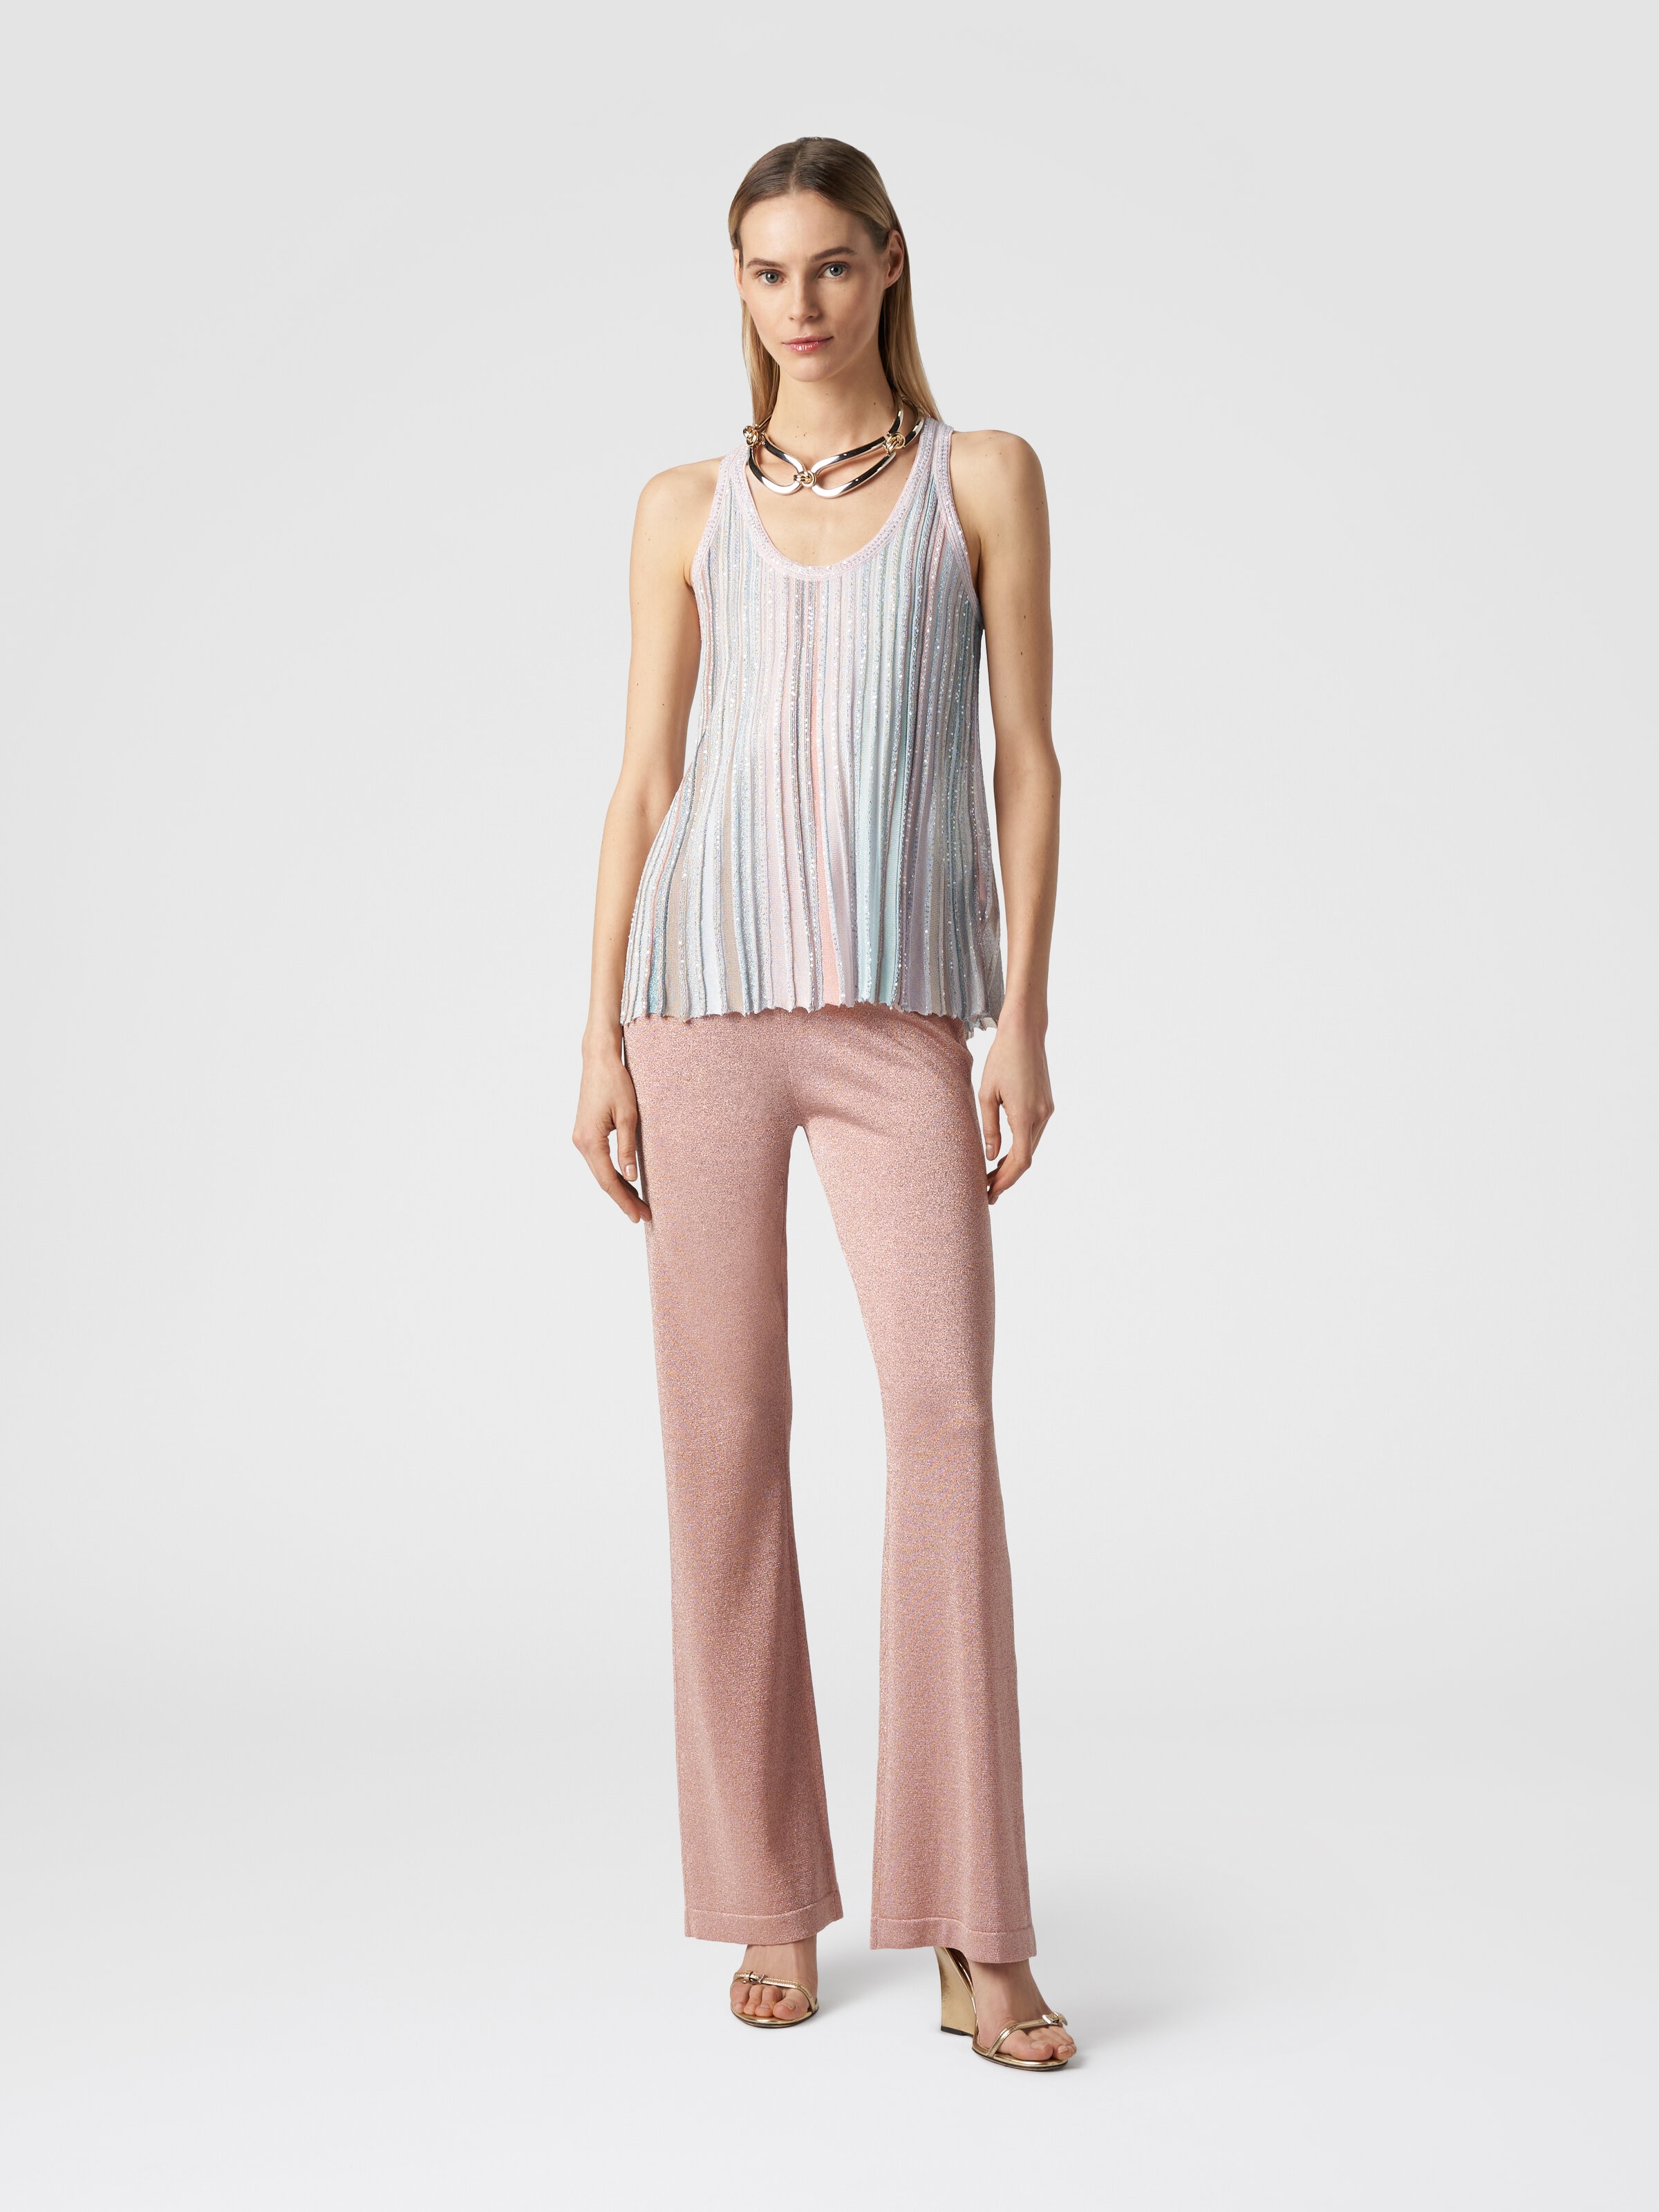 Tank top in vertical striped knit with sequins , Multicoloured  - 1